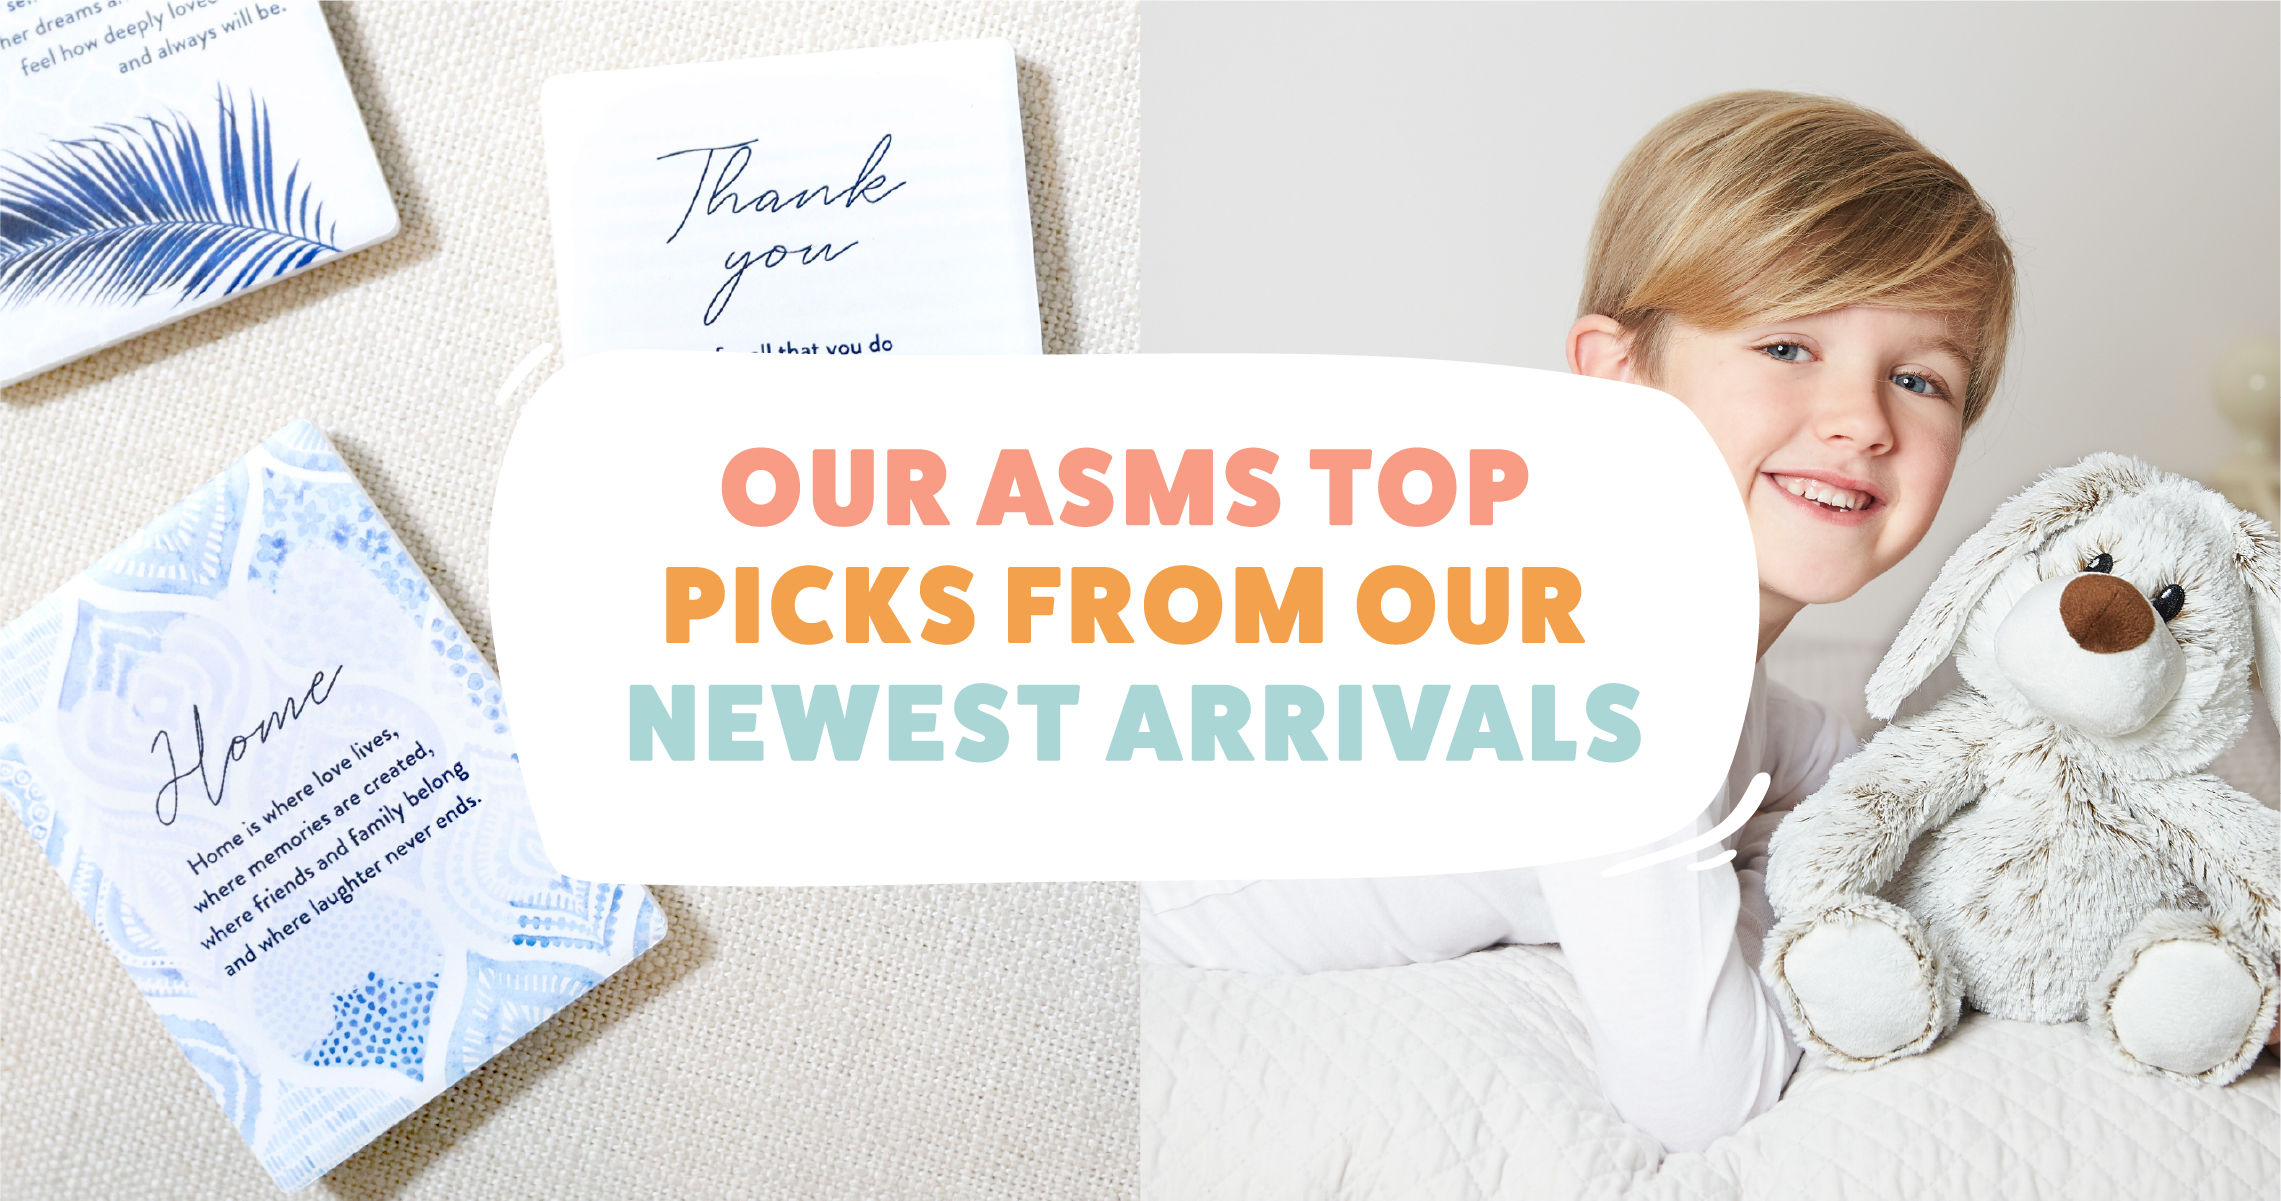 Our ASMs Top Picks From Our Latest Arrivals